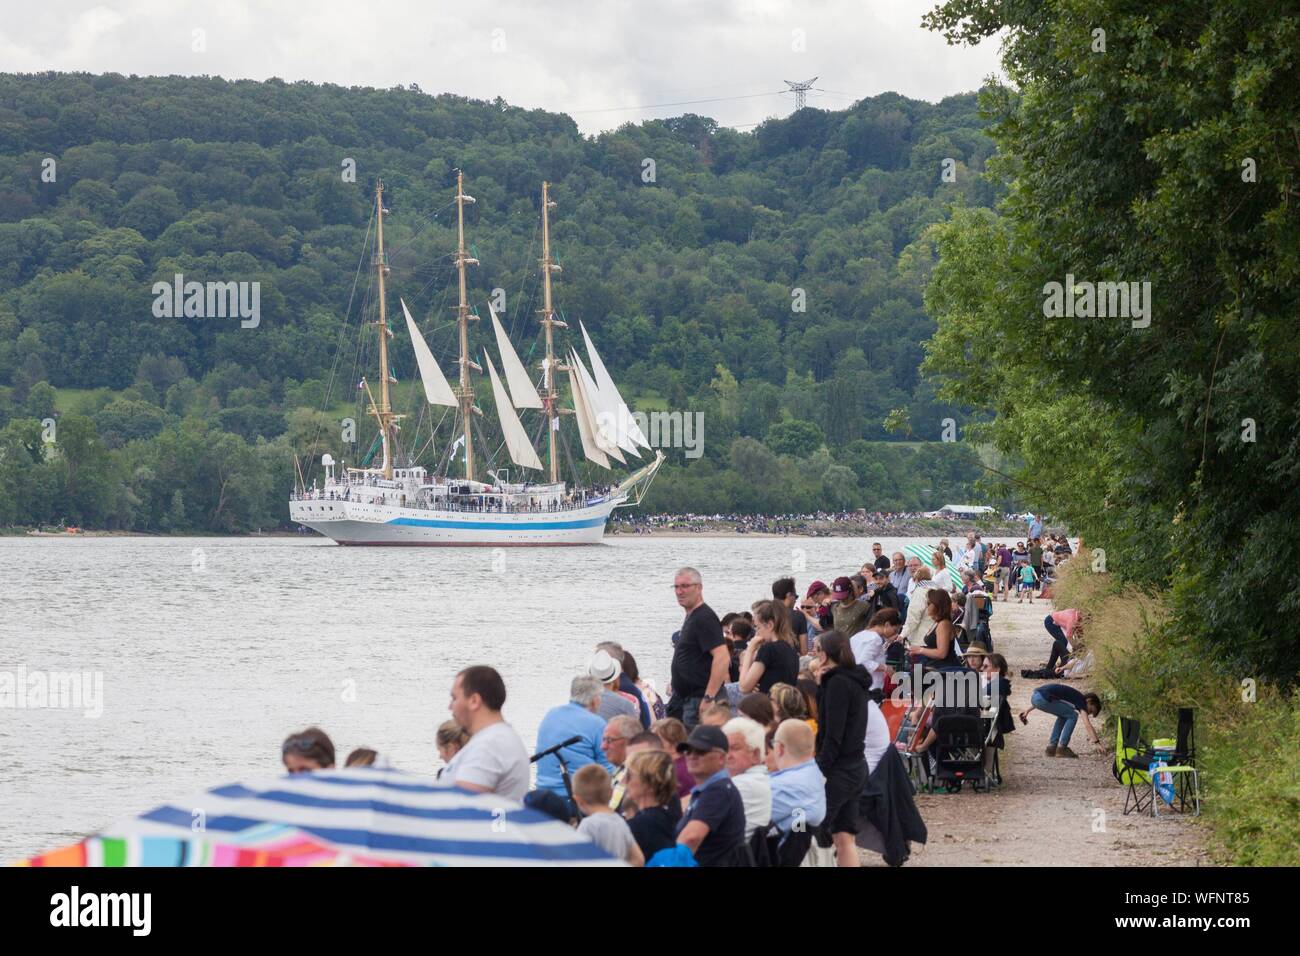 France, Seine Maritime, Mesnil sous Jumieges, Armada 2019, Grande Parade, crowd of spectators watching the Mir, three masted square rigged ship, sailing on the Seine River, among a lush green landscape Stock Photo